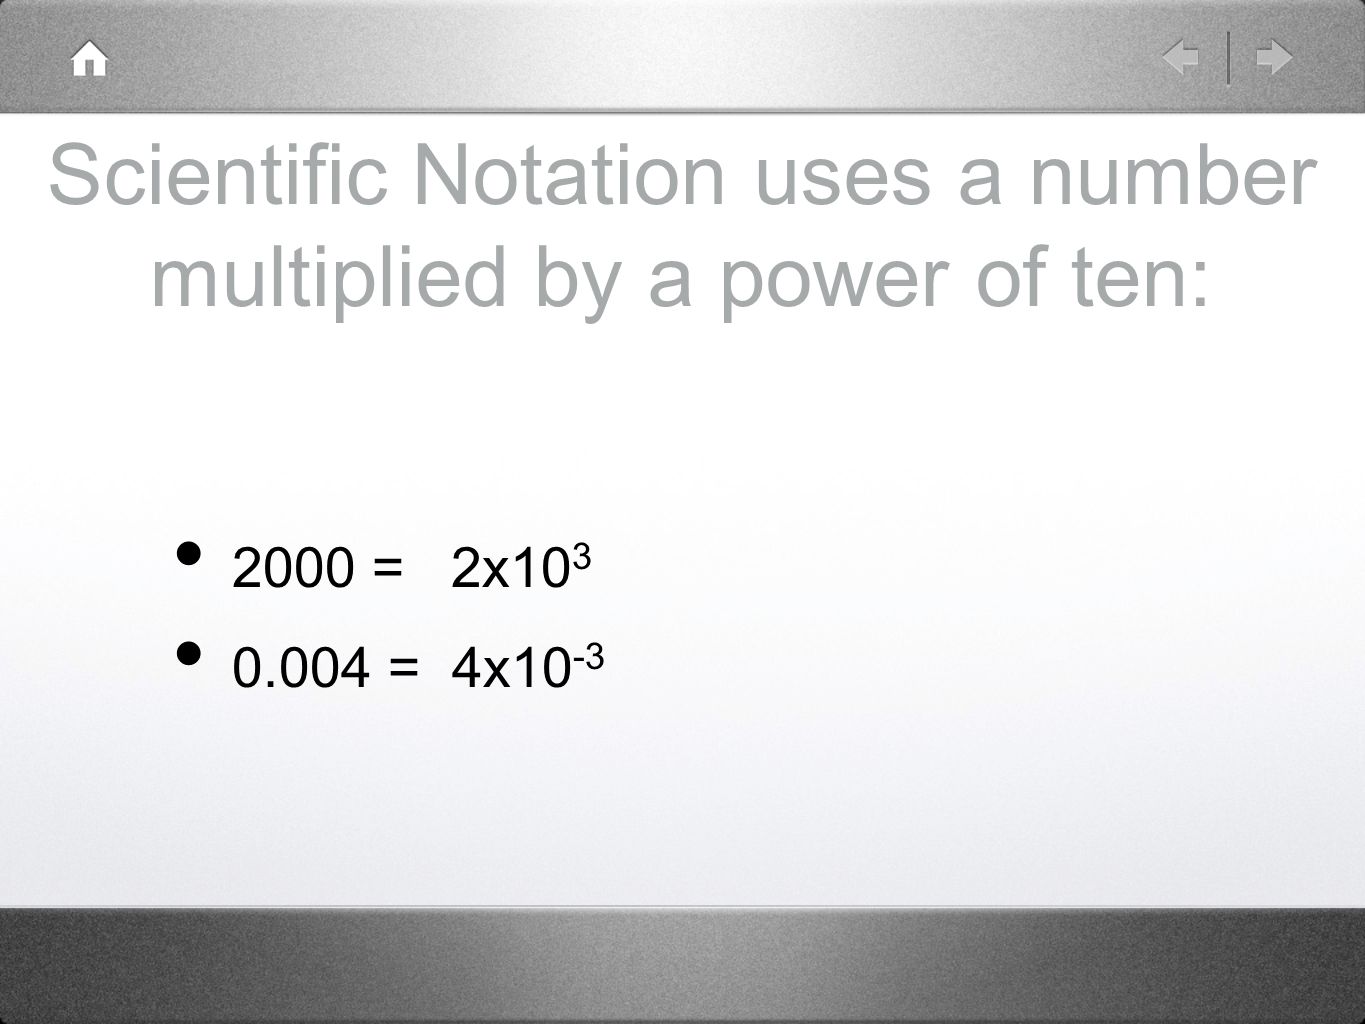 Scientific Notation uses a number multiplied by a power of ten: